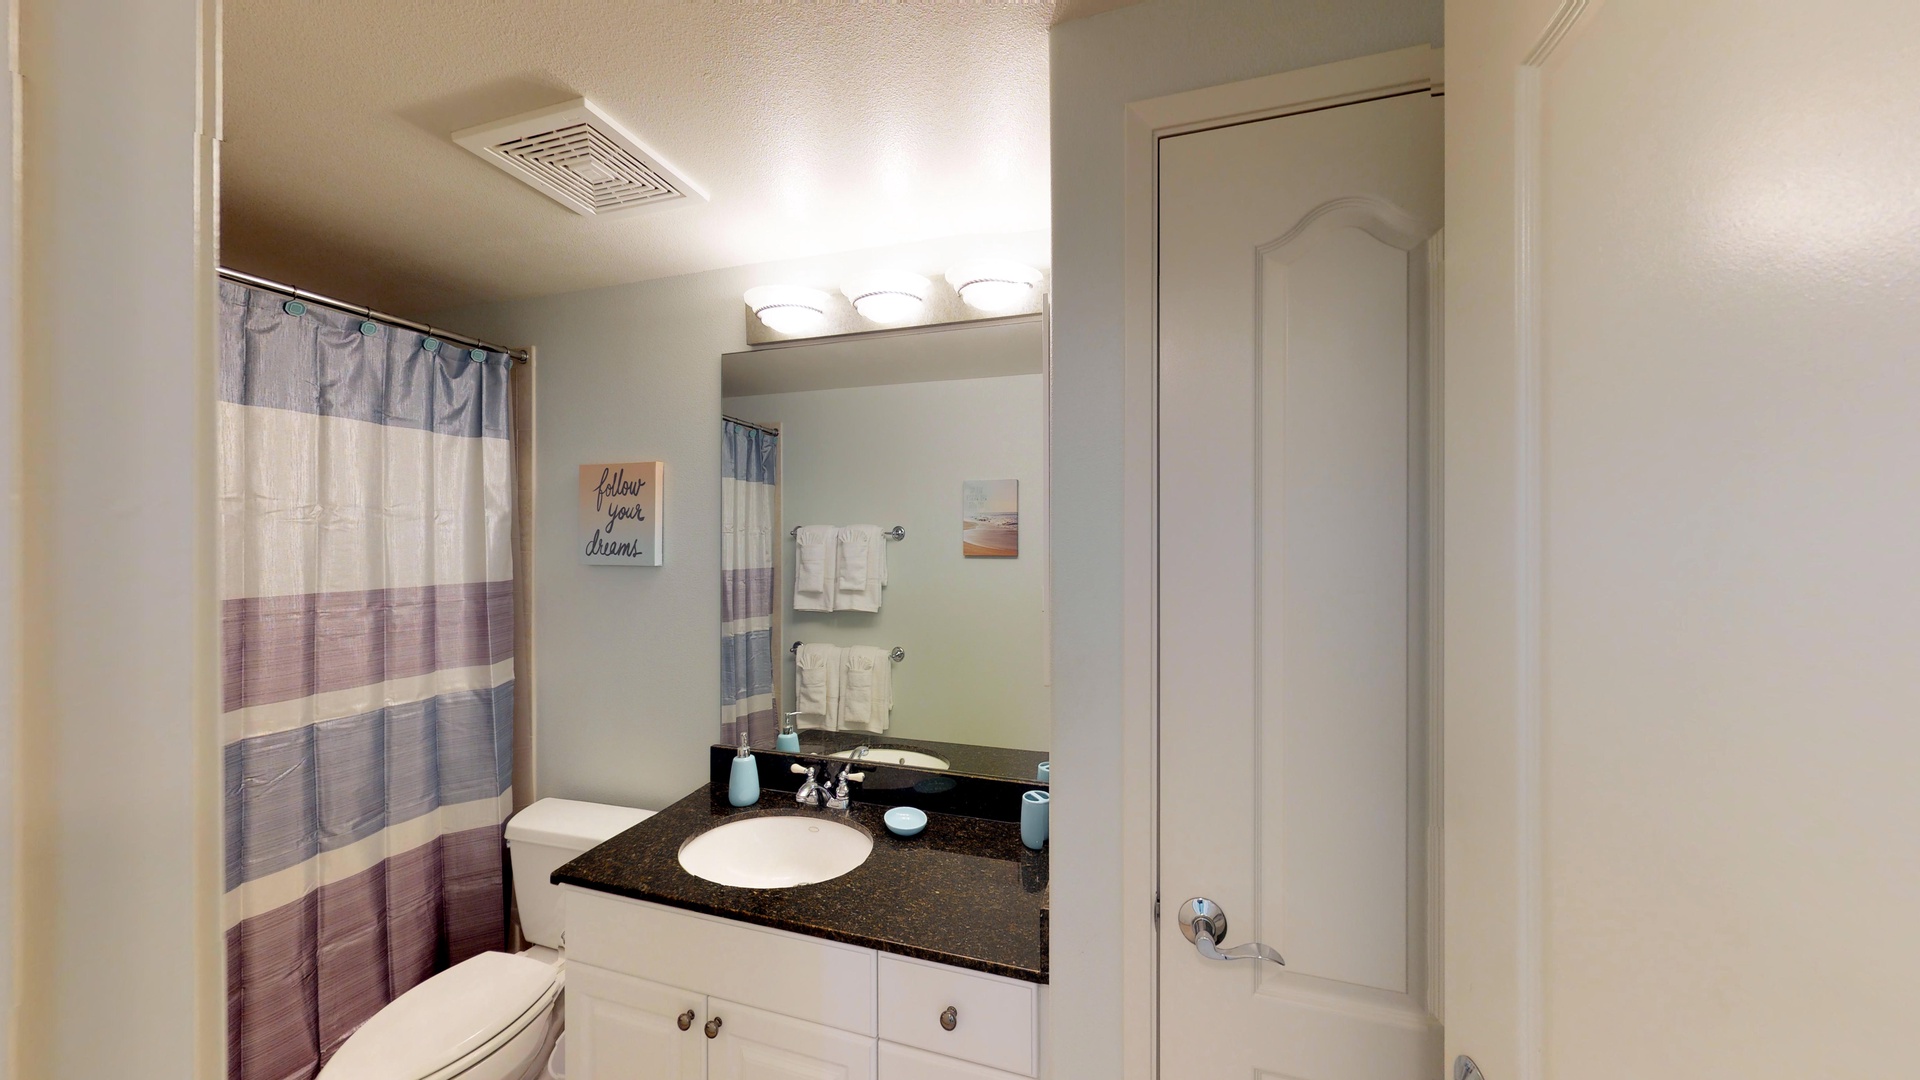 Kapolei Vacation Rentals, Ko Olina Kai 1035D - The downstairs guest bathroom with a shower.